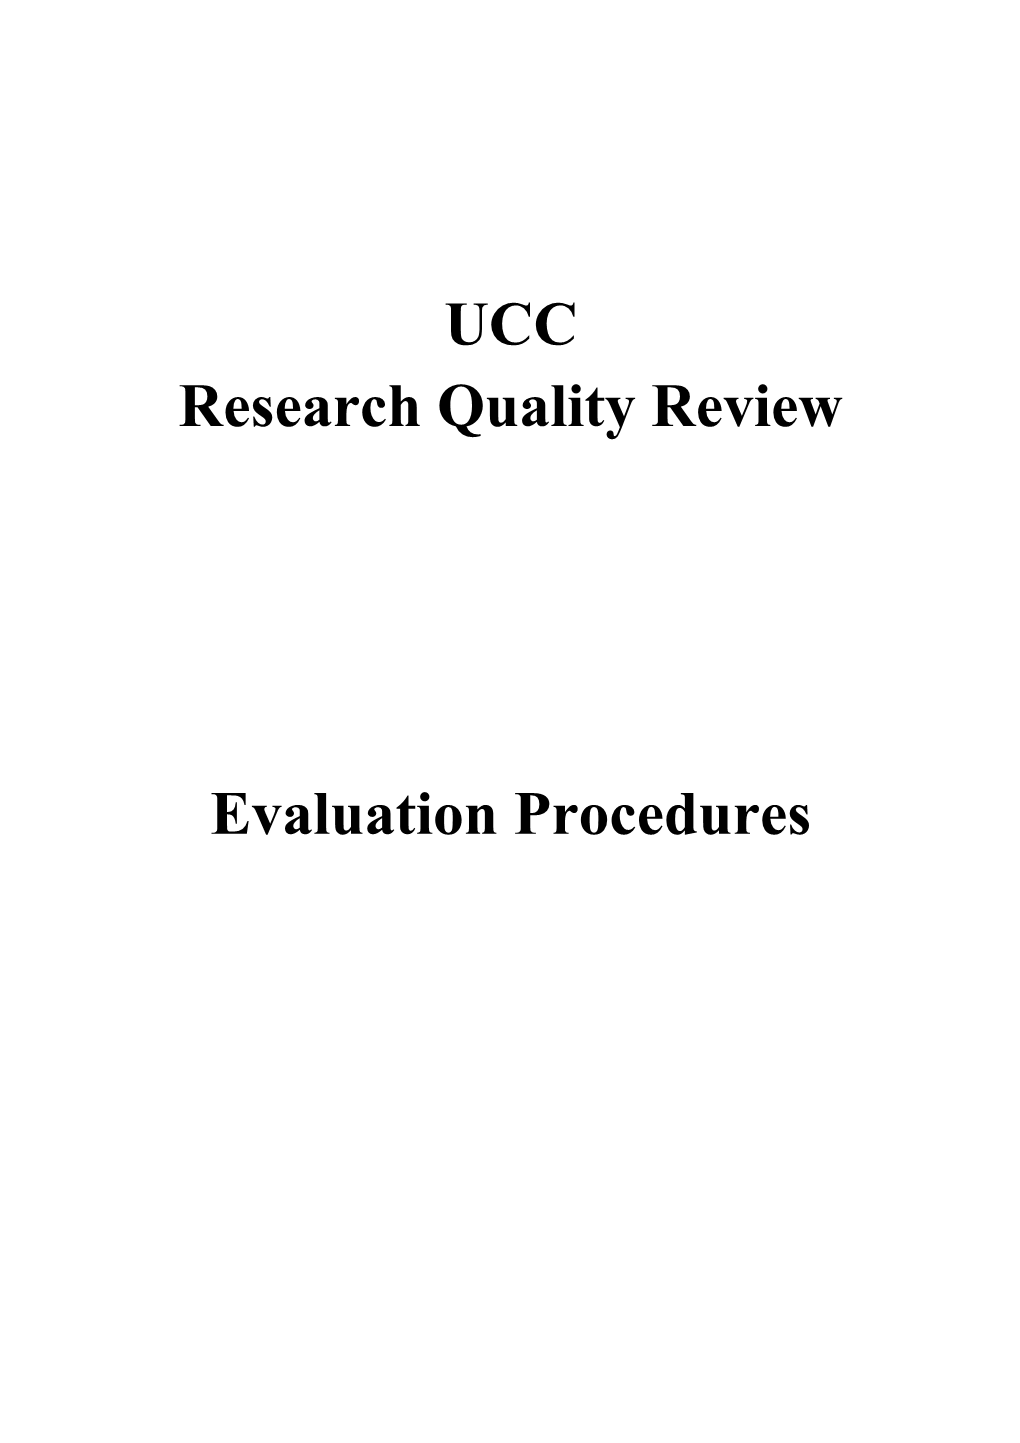 Research Quality Review